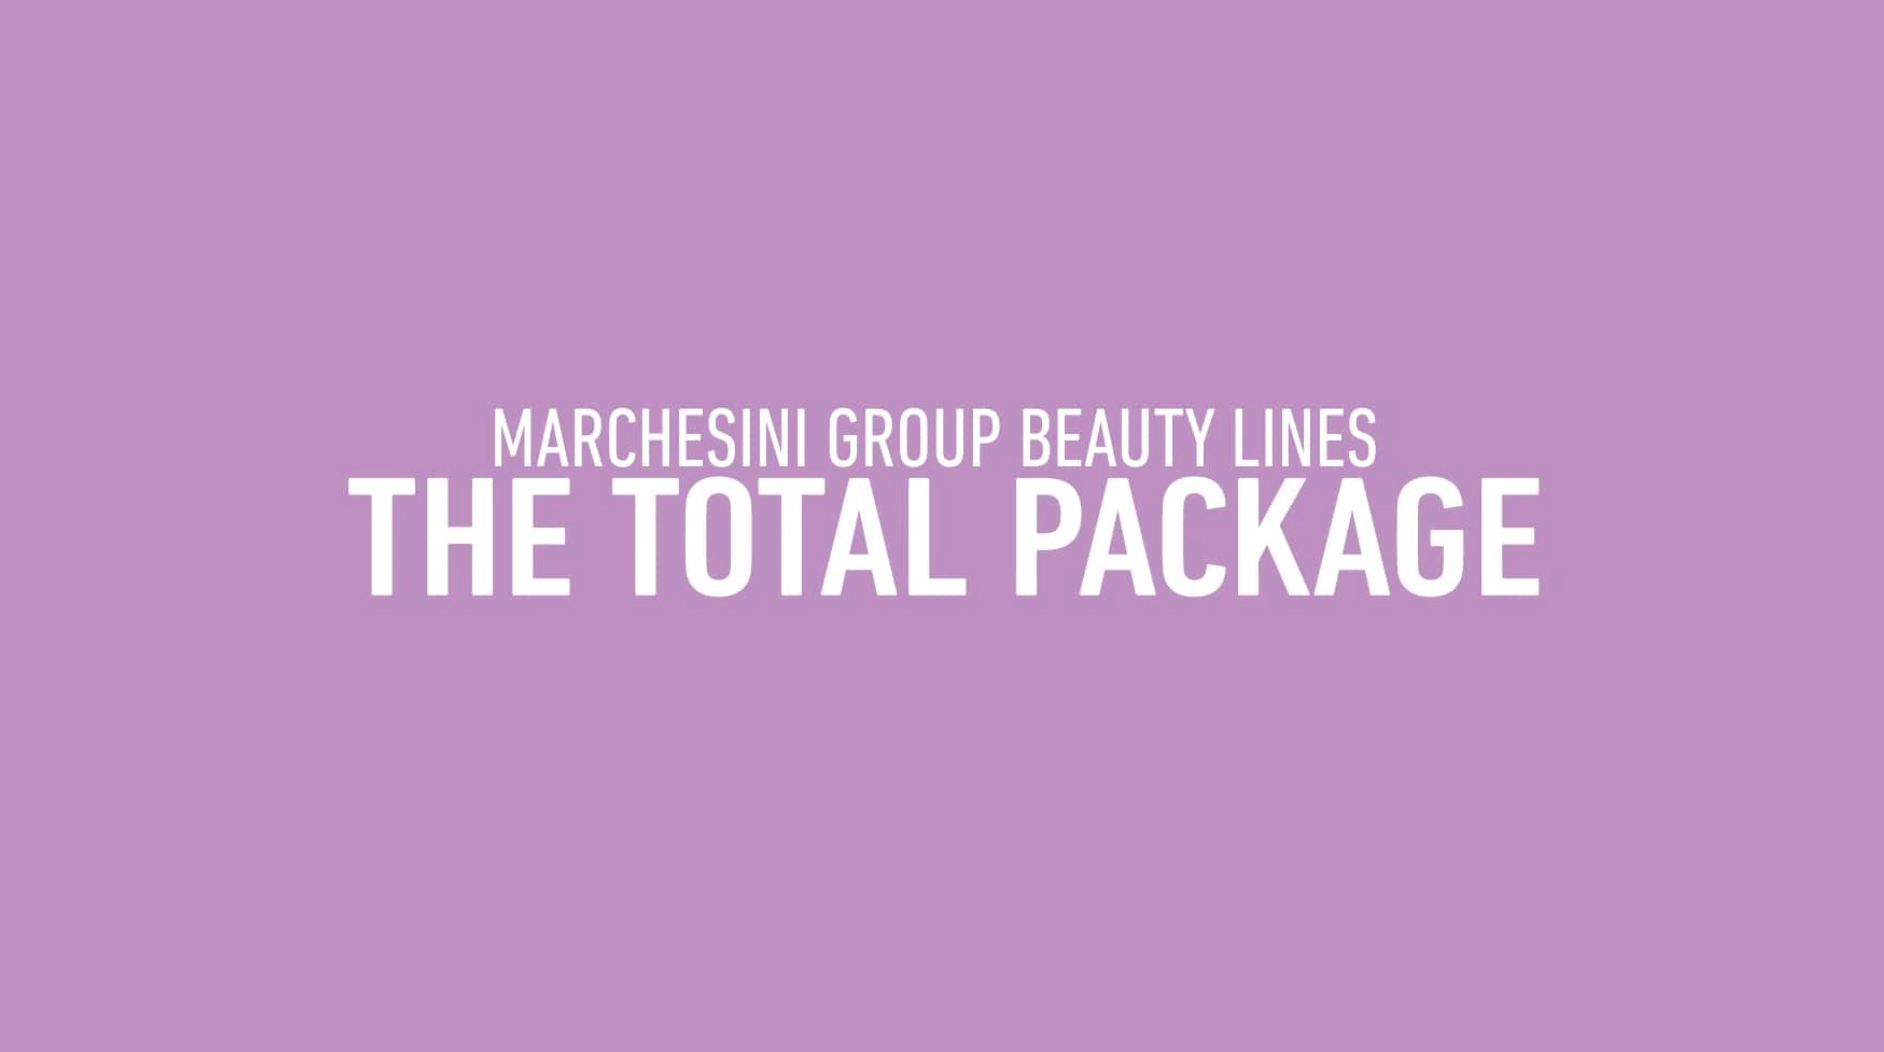 Marchesini new beauty division